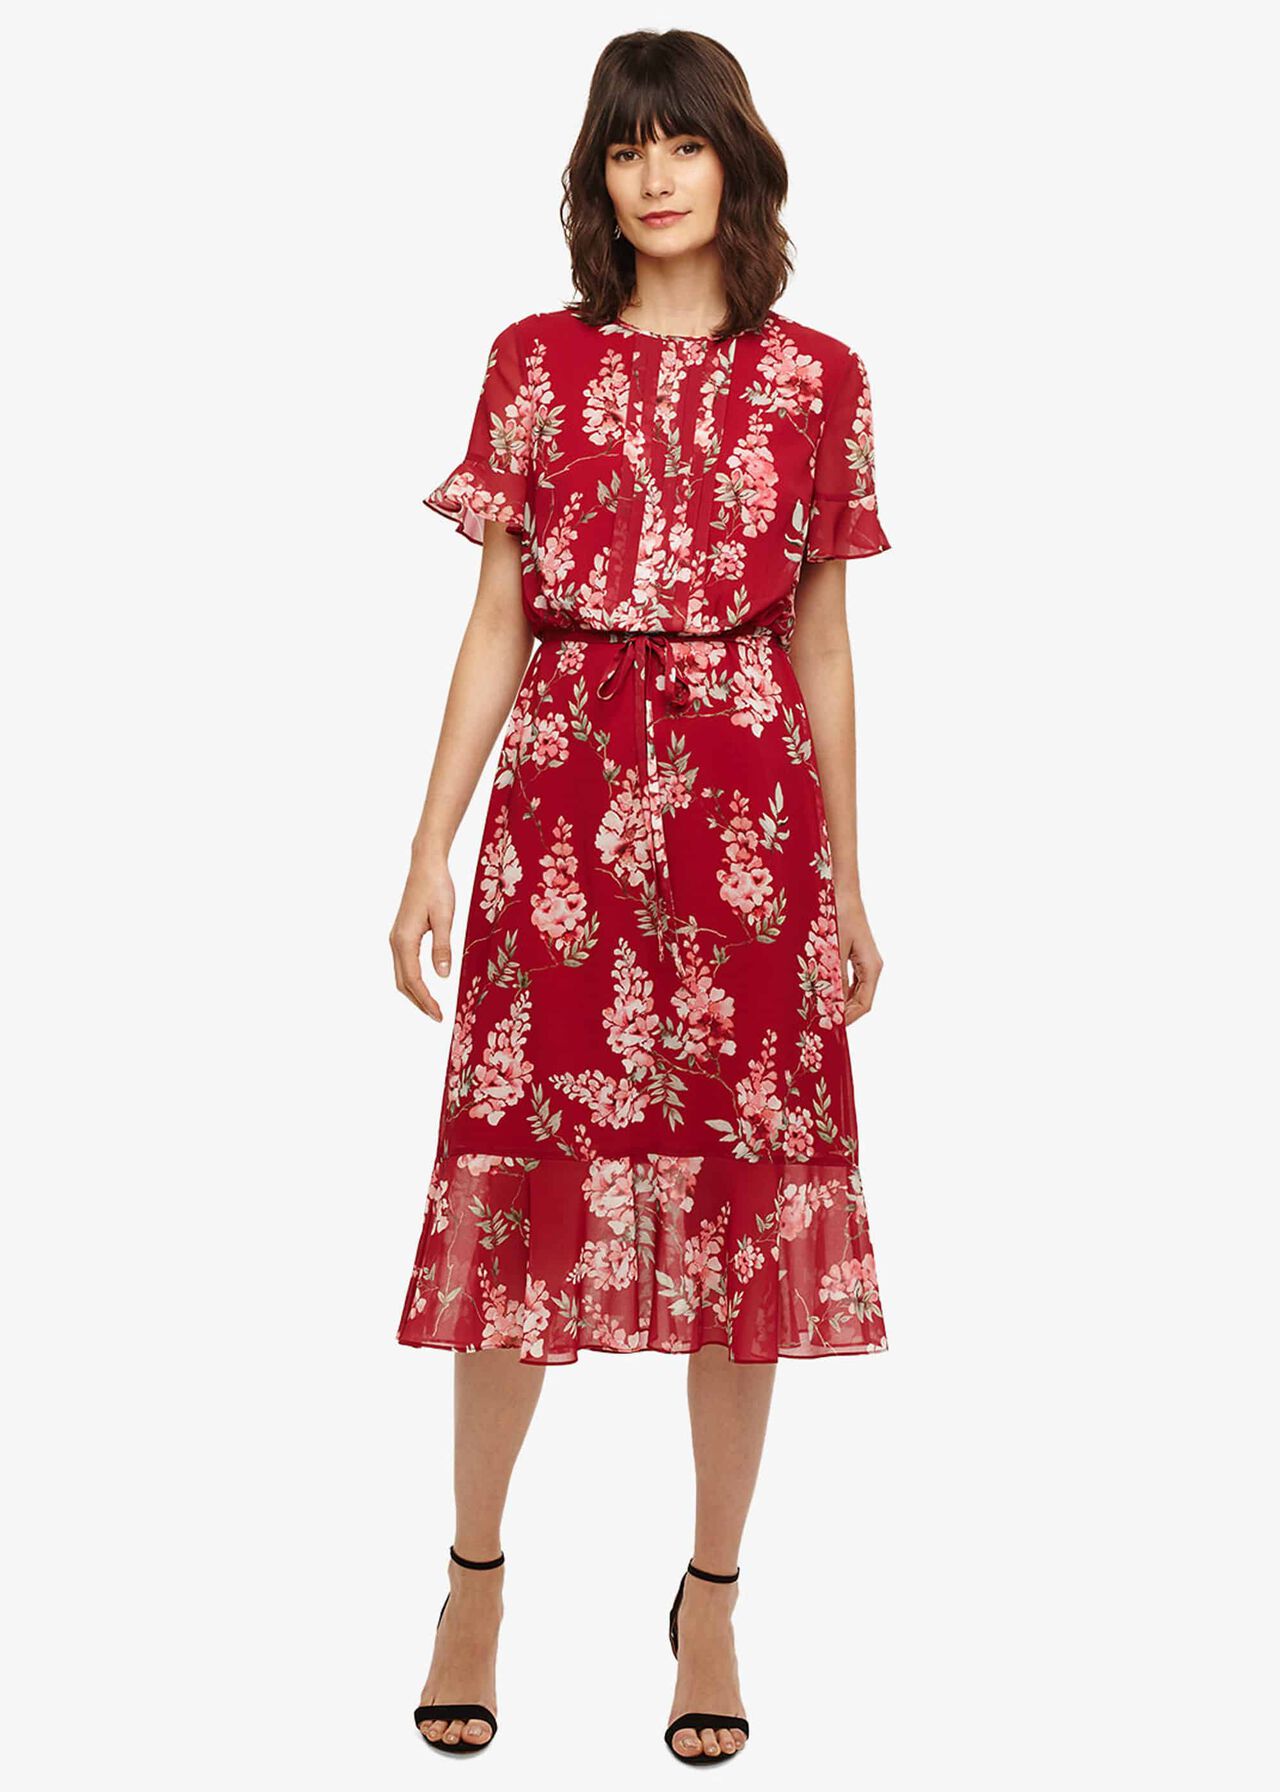 Helia Floral Dress | Phase Eight